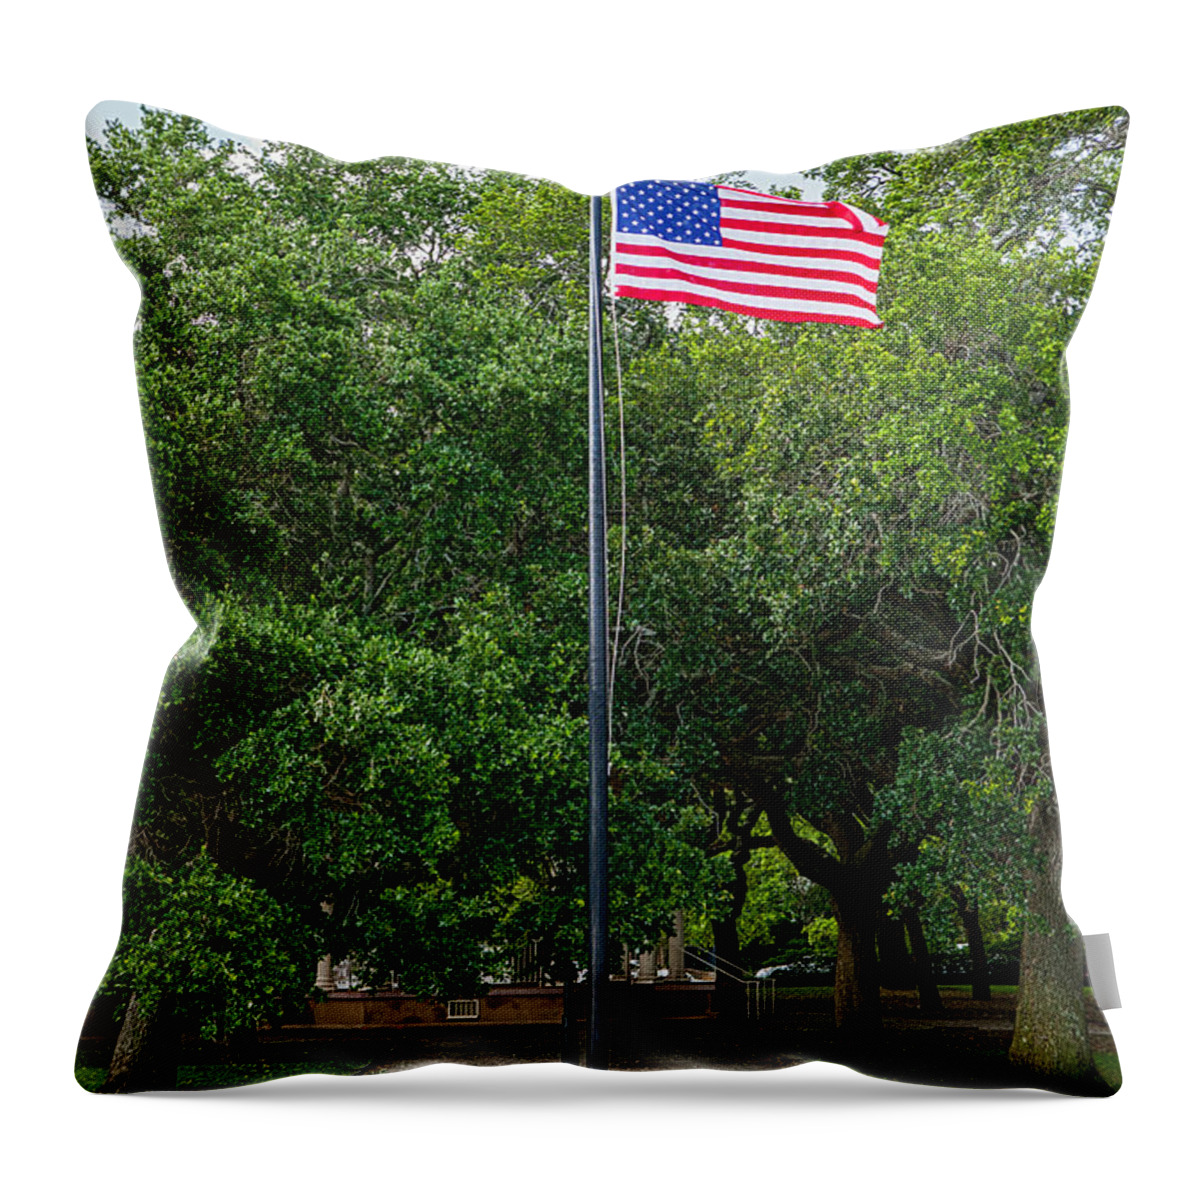 Landscape Throw Pillow featuring the photograph Old Glory High and Proud by Sennie Pierson